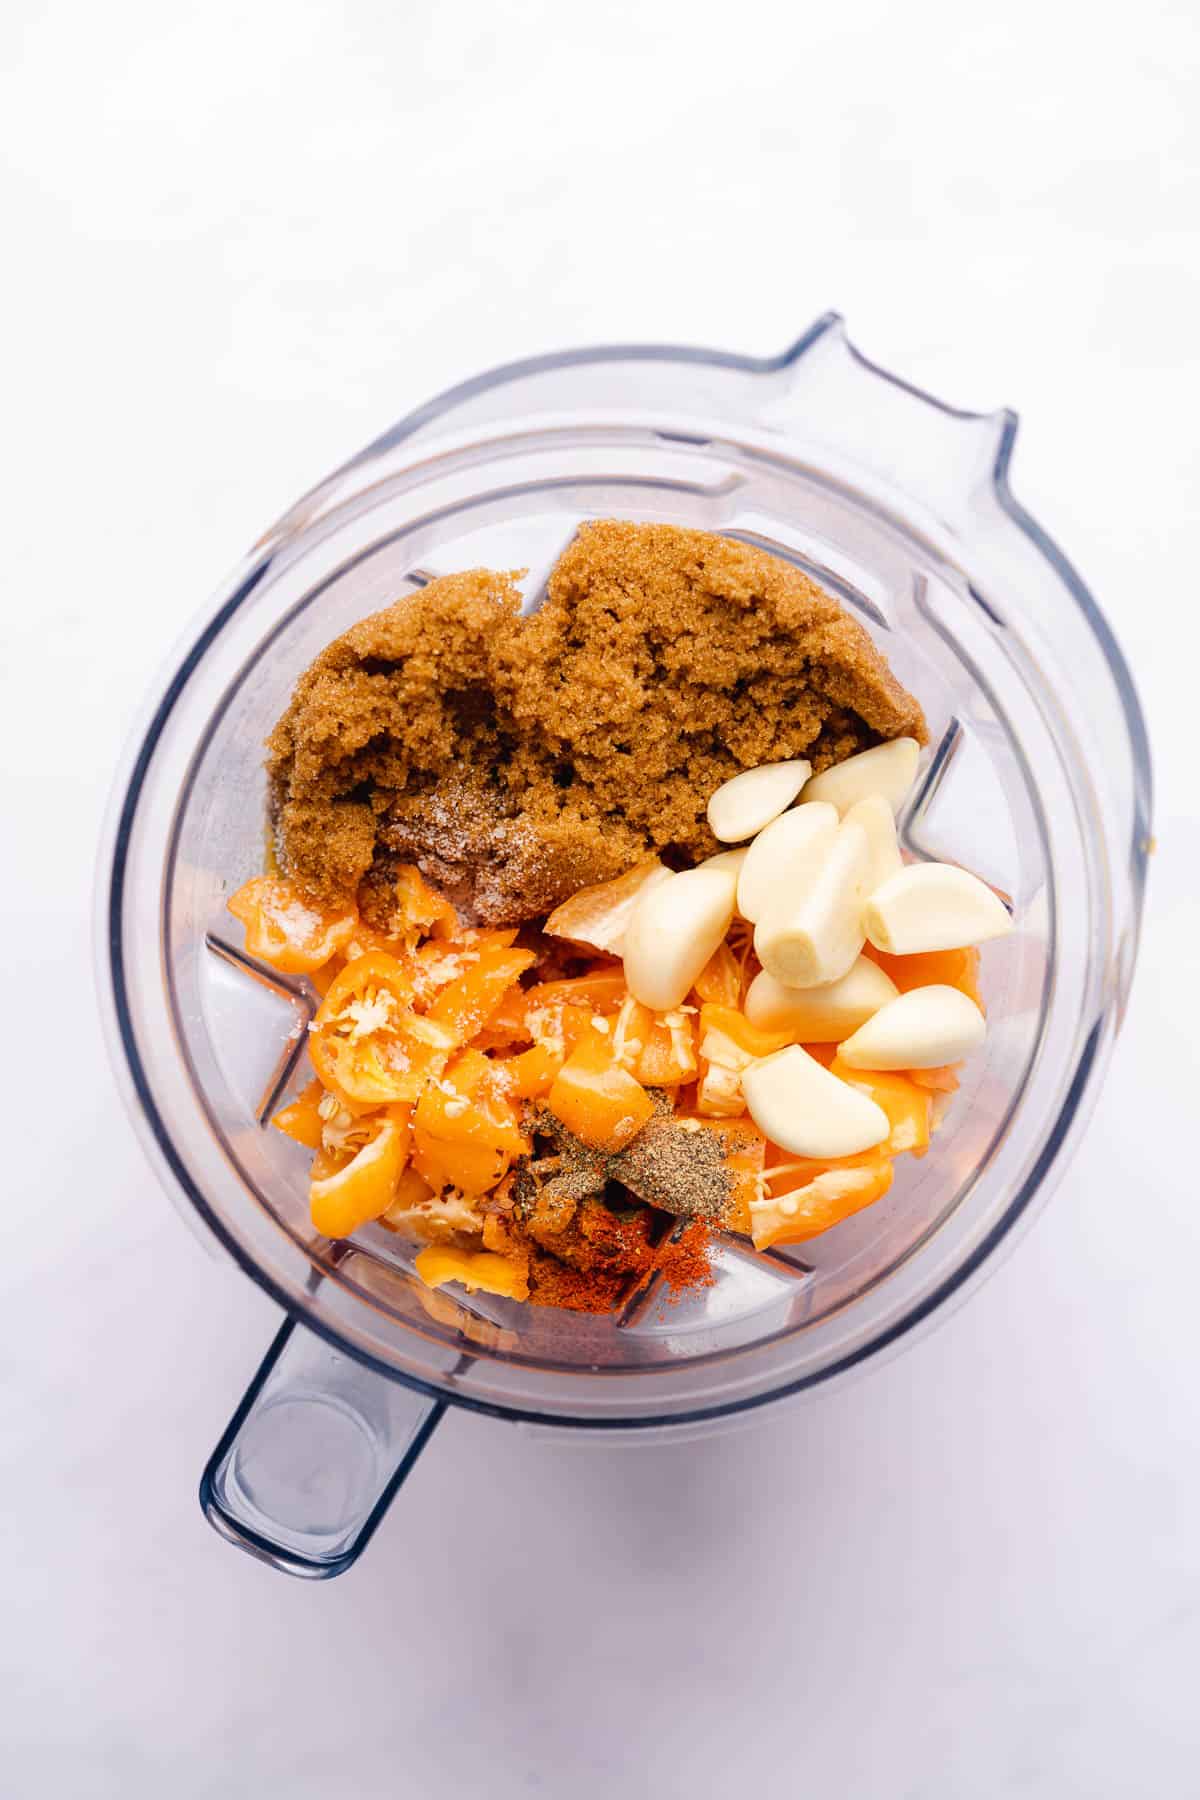 habanero peppers, garlic, onions, seasonings and brown sugar replacement in a blender